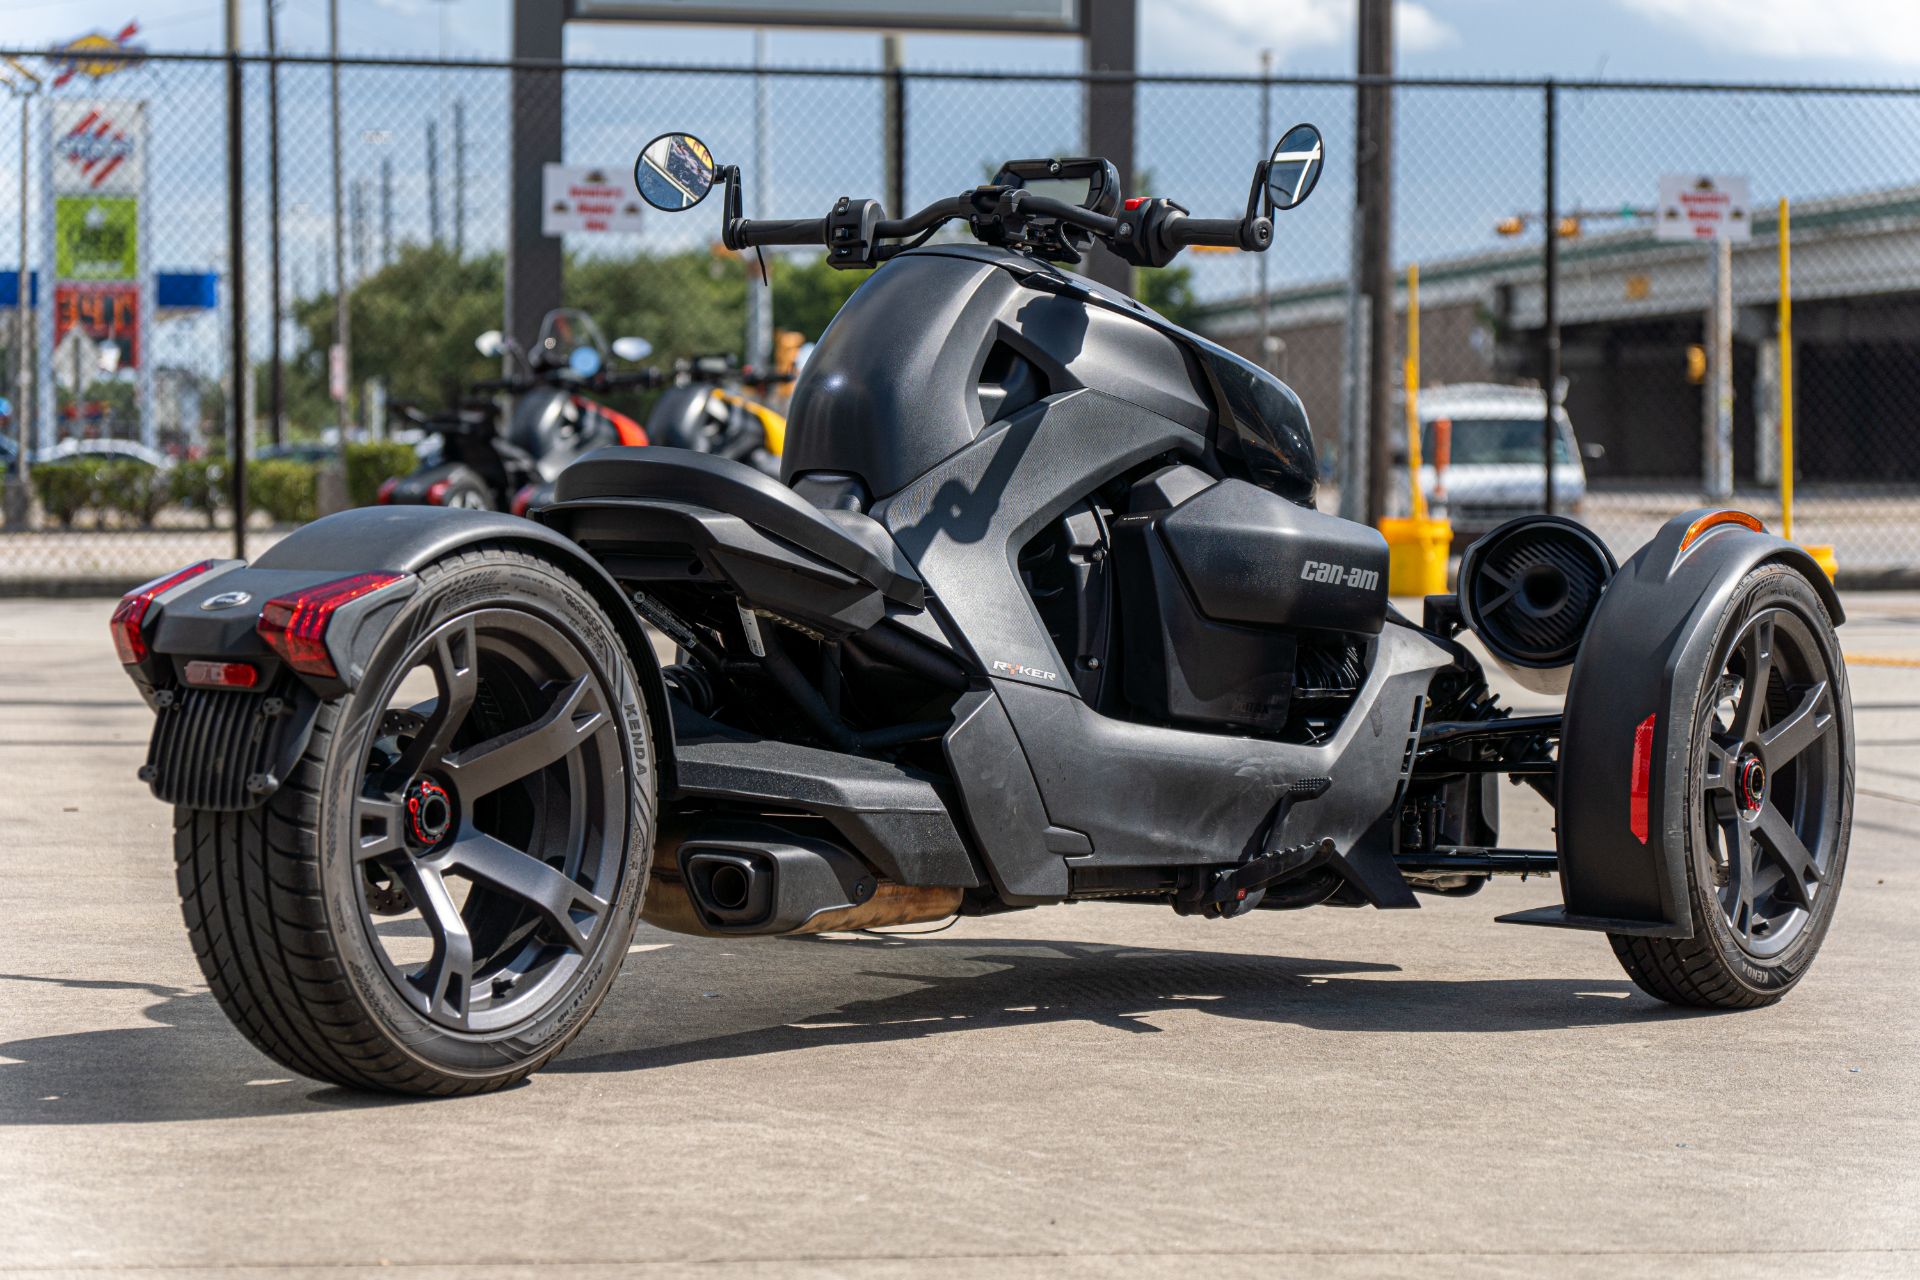 2021 Can-Am Ryker 900 ACE in Houston, Texas - Photo 4